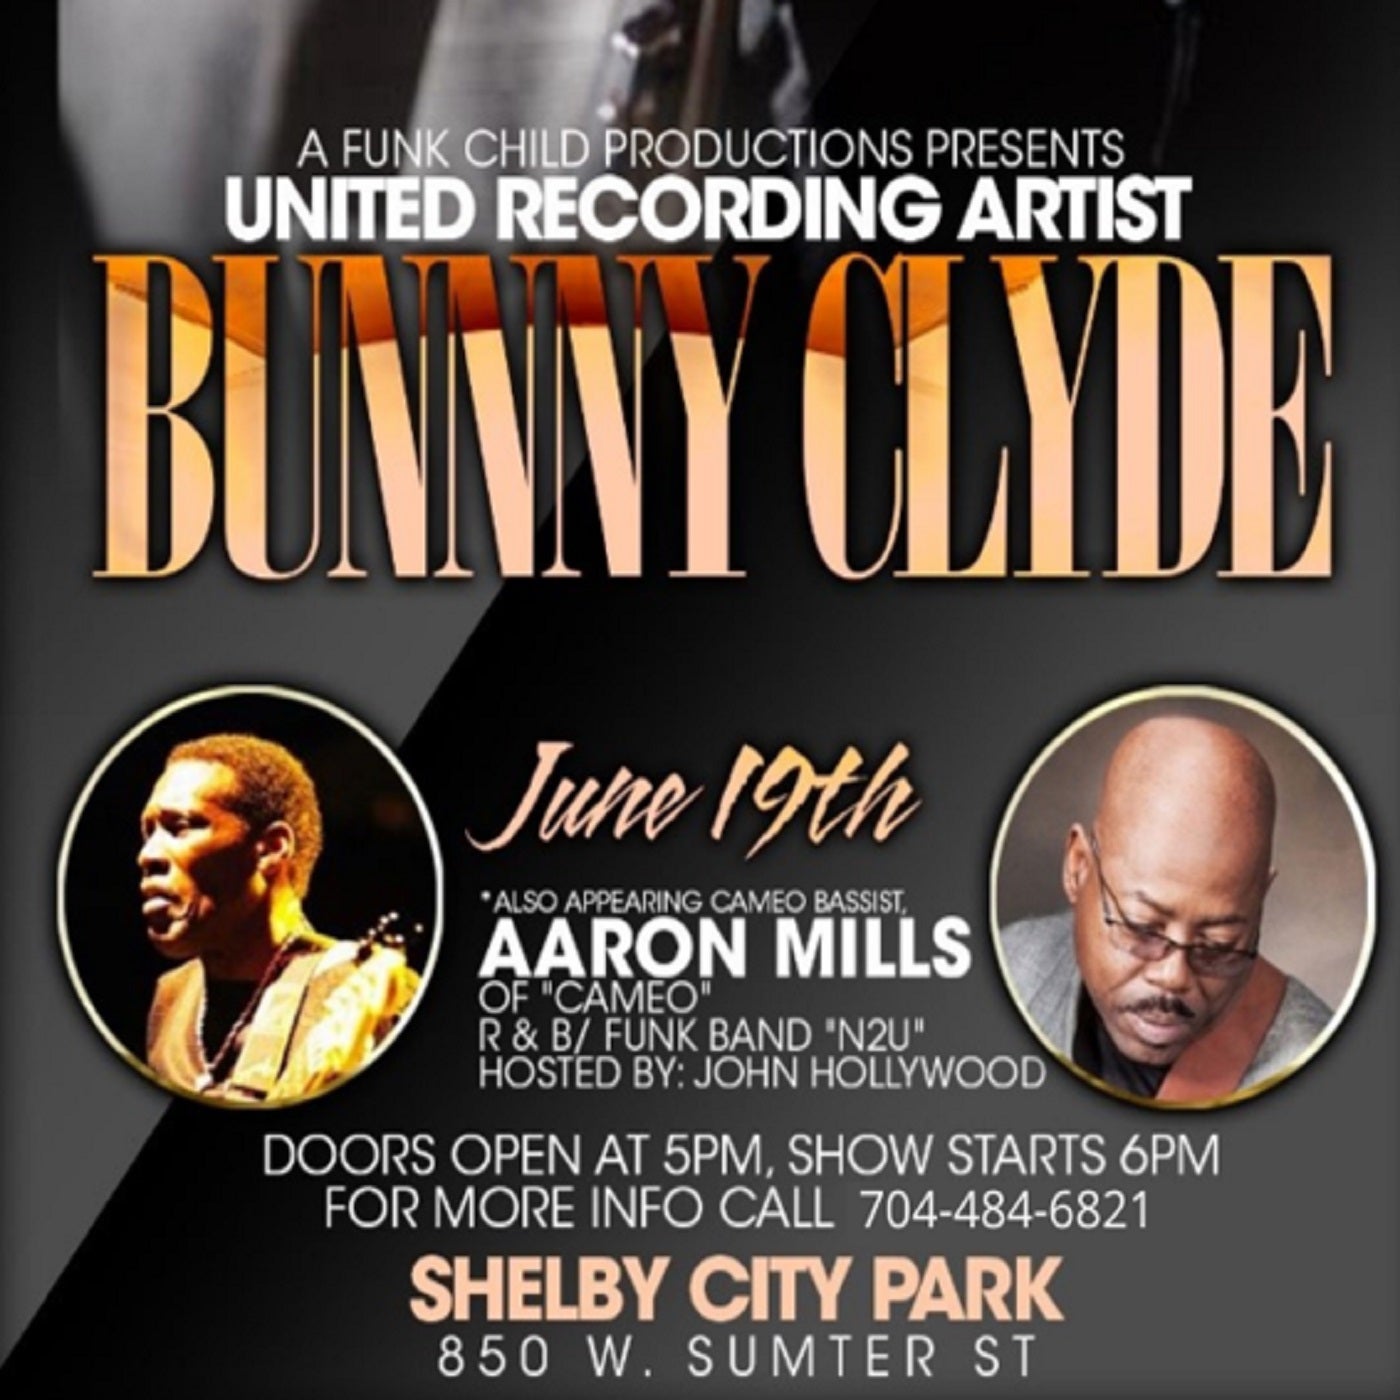 United Recording Artist Bunny Clyde Coming Home Tour